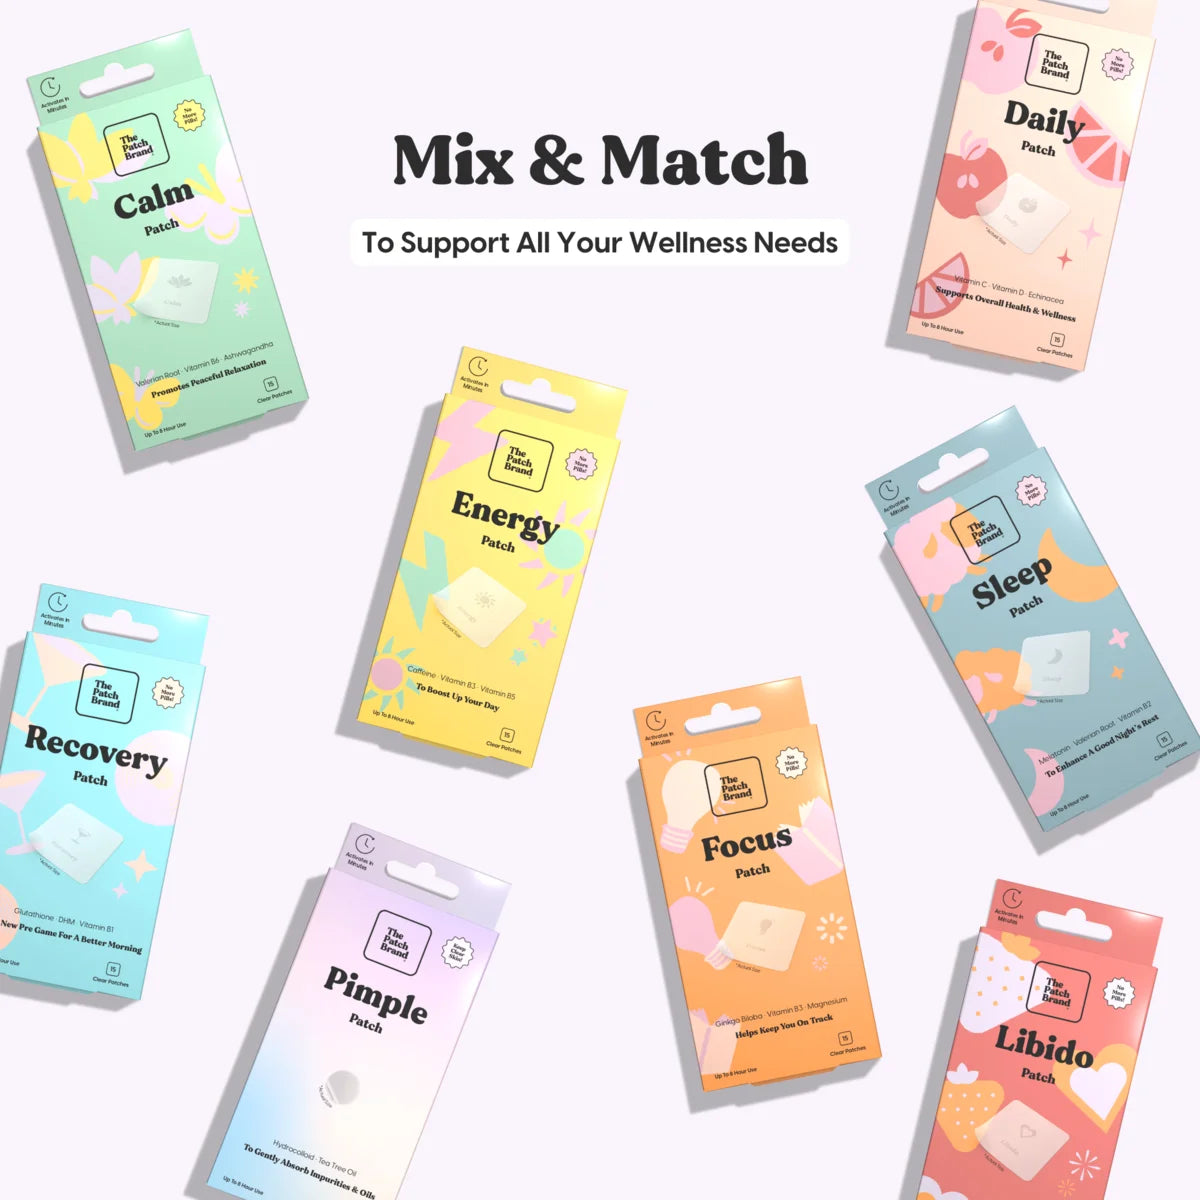 Best Pimple Patch | The Patch Brand 144 Patches